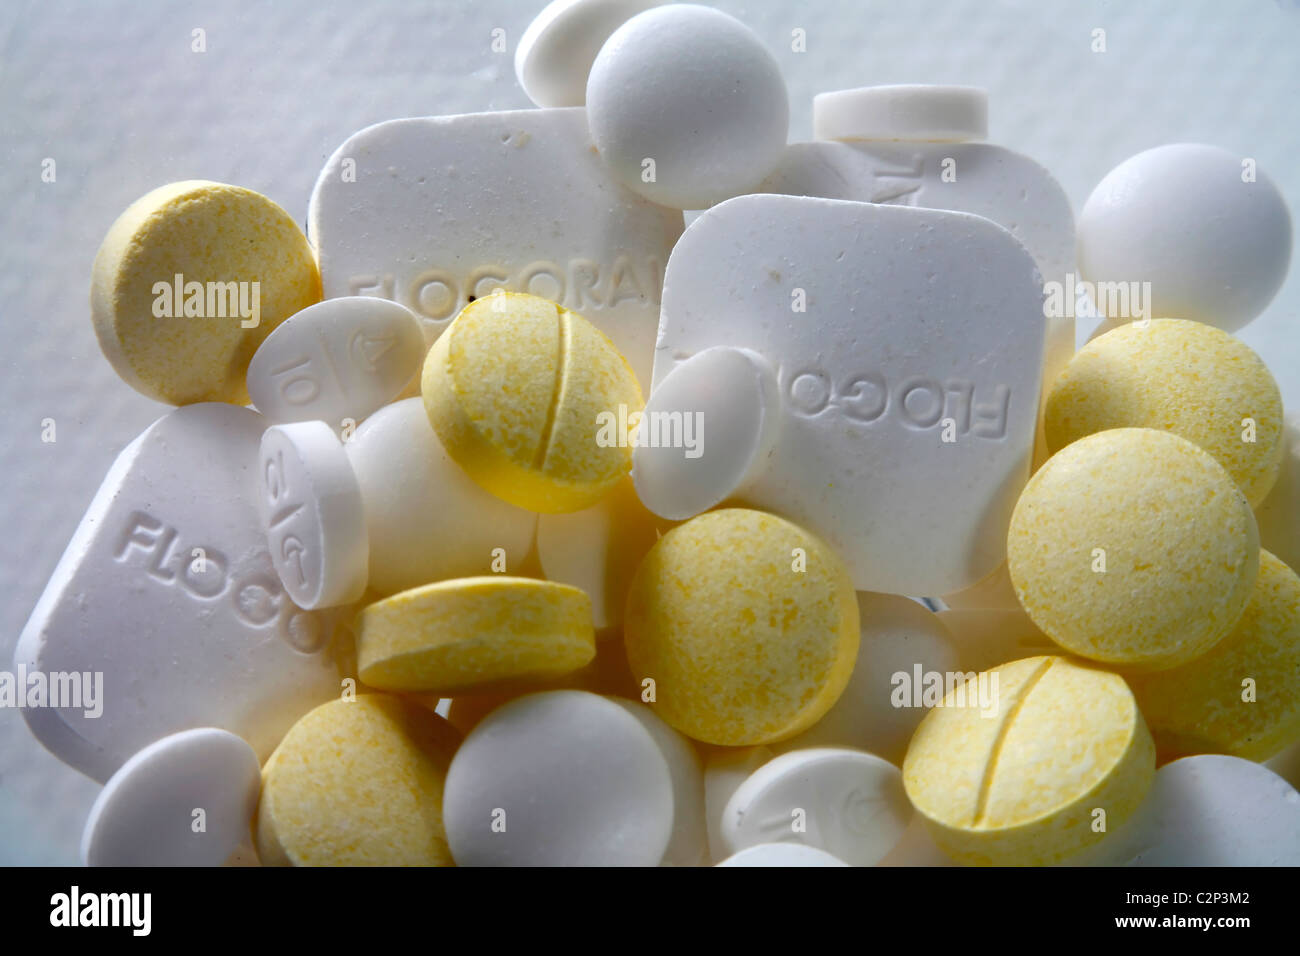 medical products Stock Photo